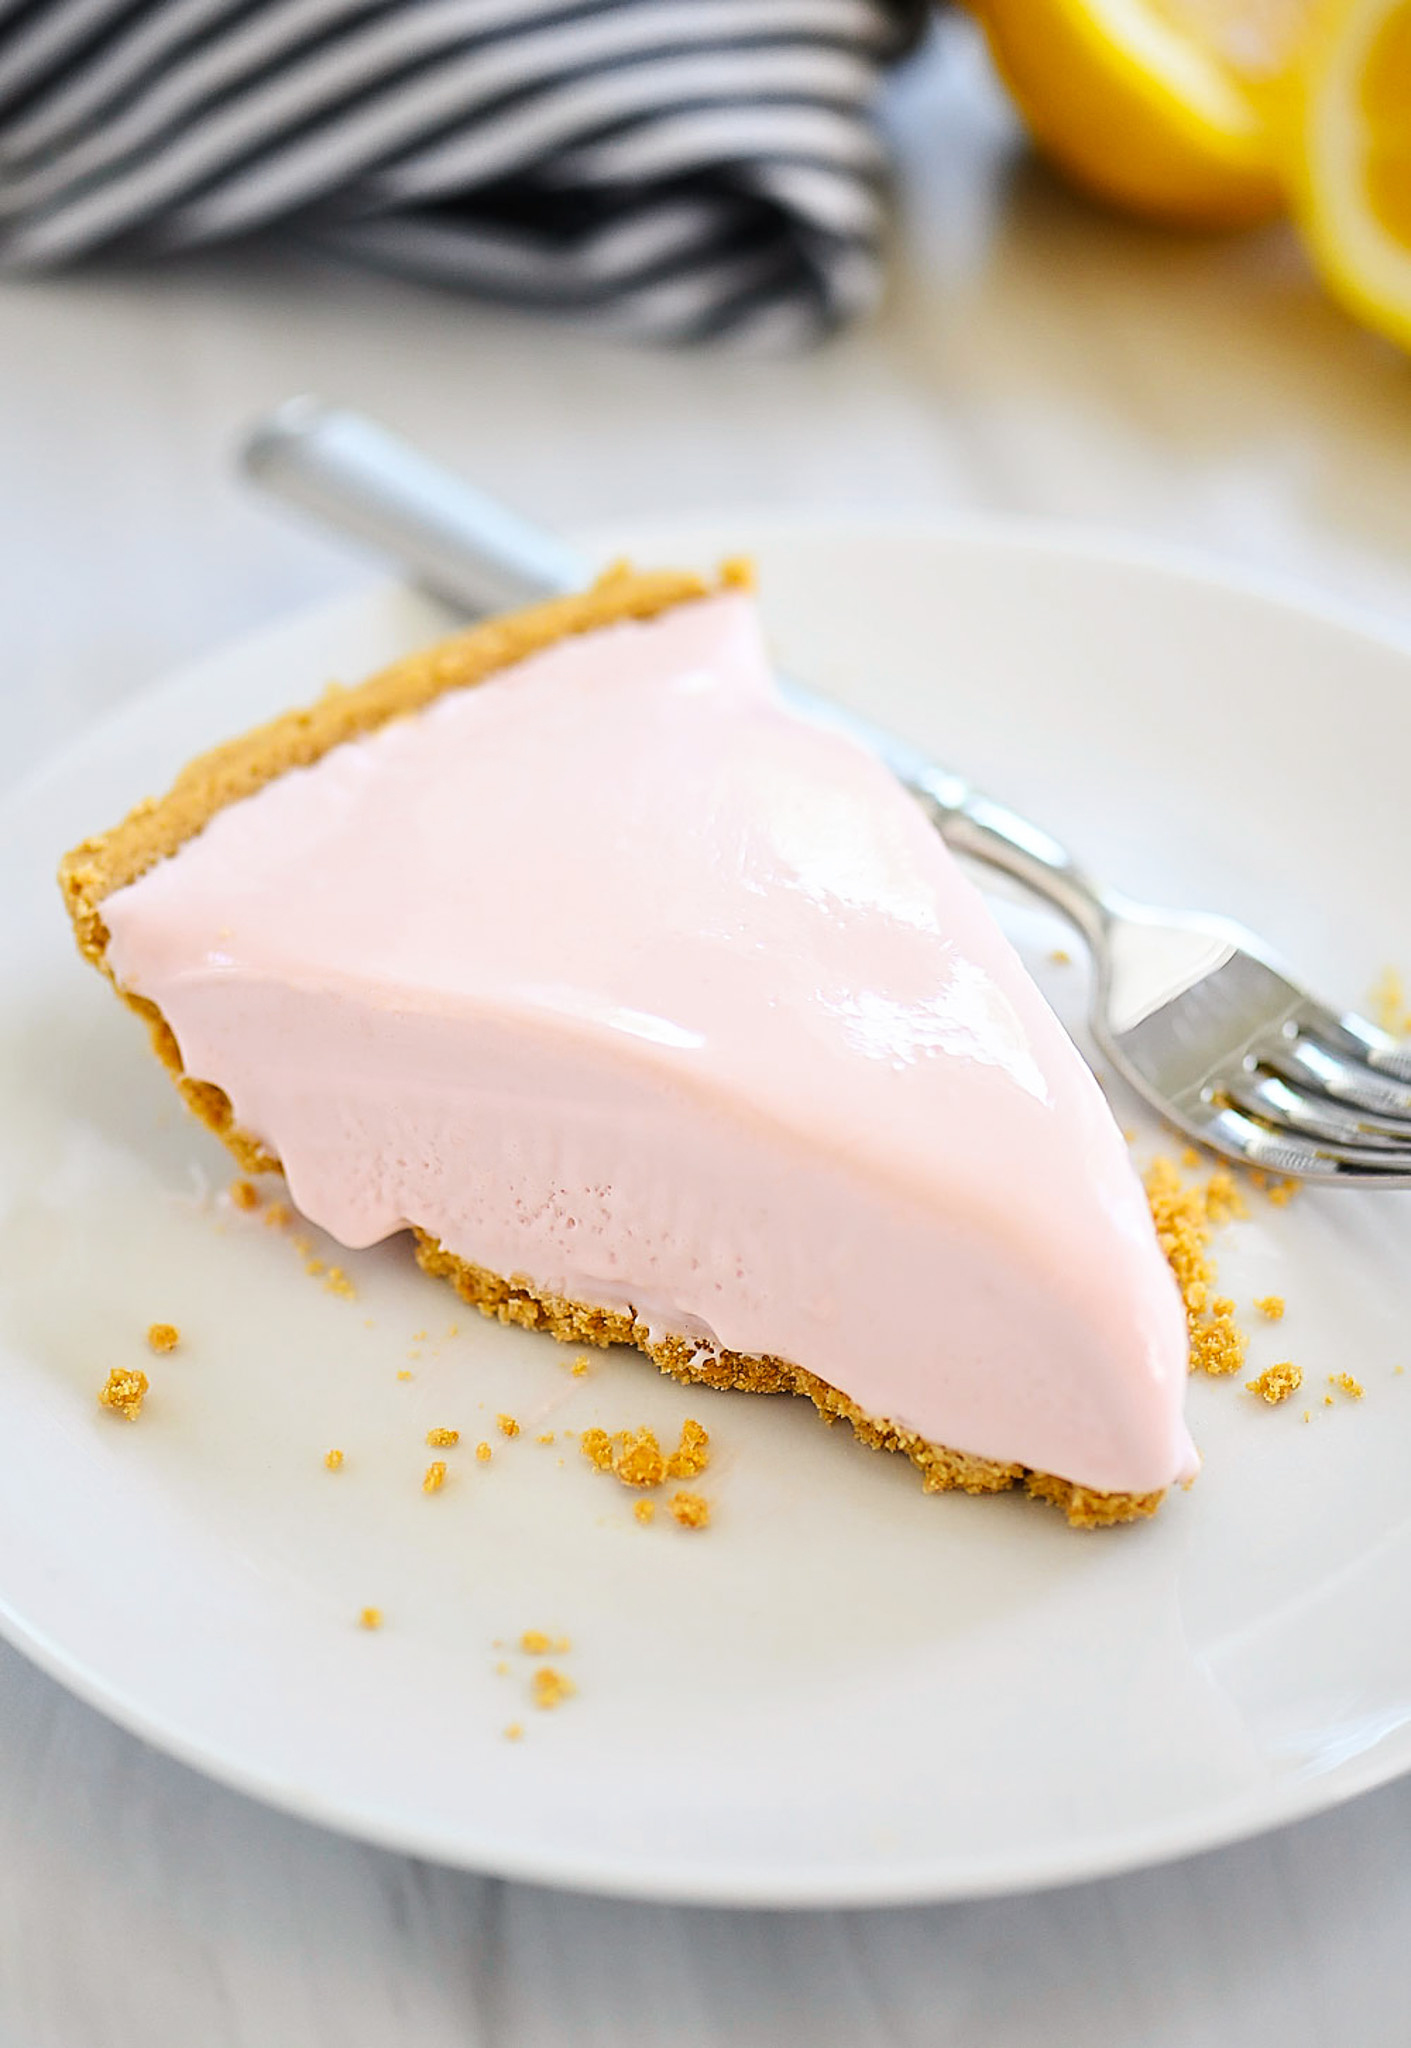 Frozen pink lemonade pie is a refreshing and creamy pie that tastes just like frozen pink lemonade and is made with only 4 ingredients. Life-in-the-Lofthouse.com